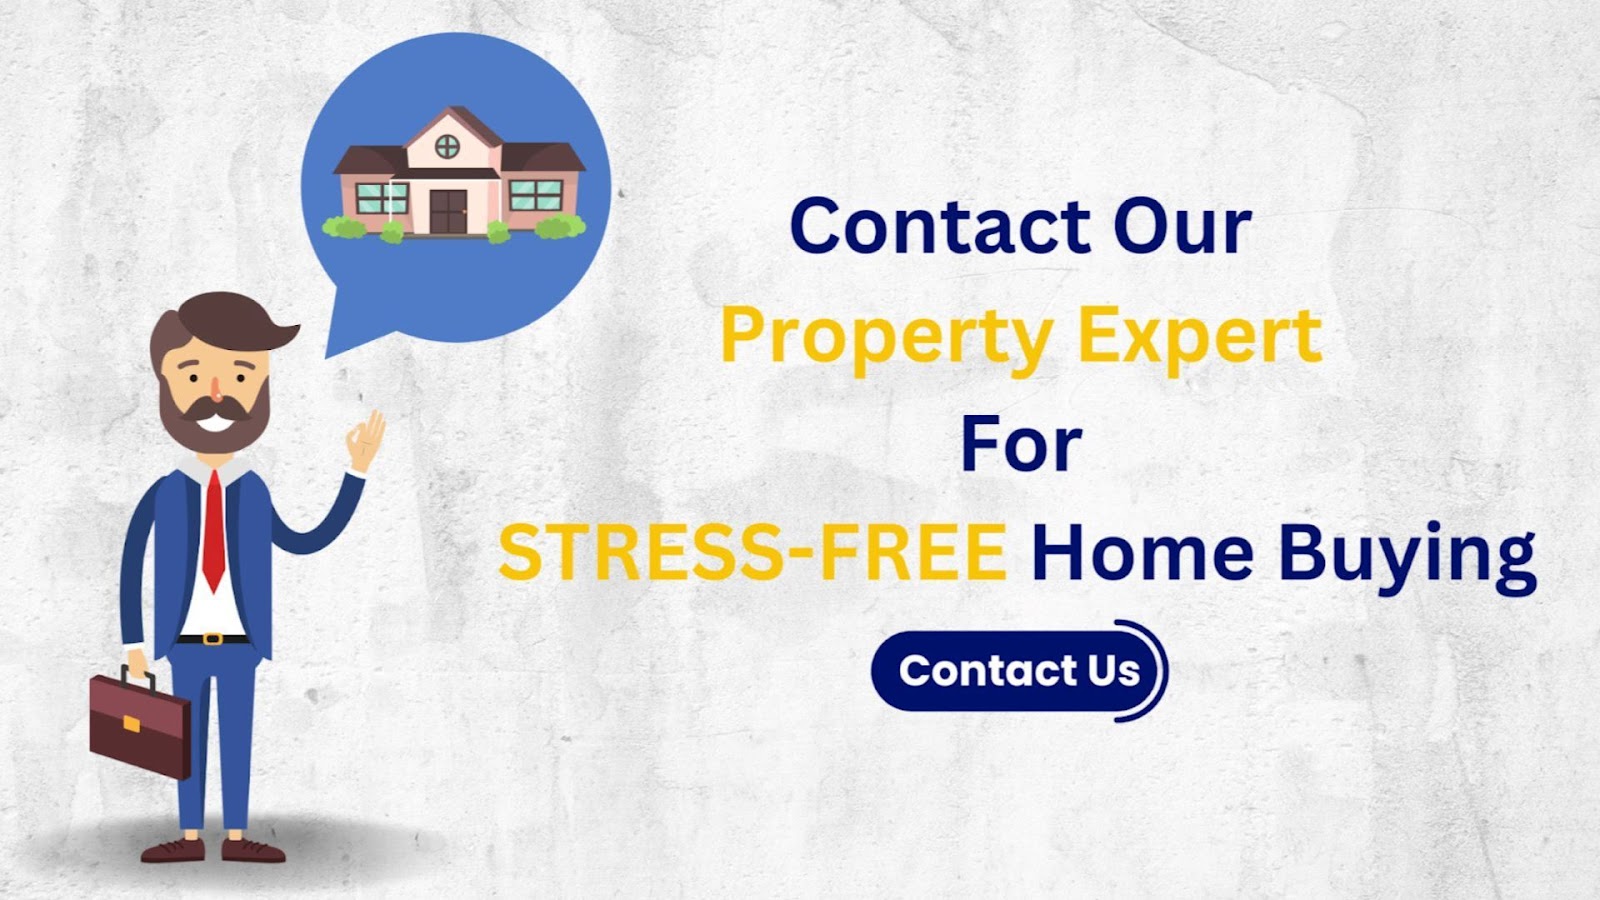 Contact the property expert at PropertyCloud to get guidance related to the property selling process.